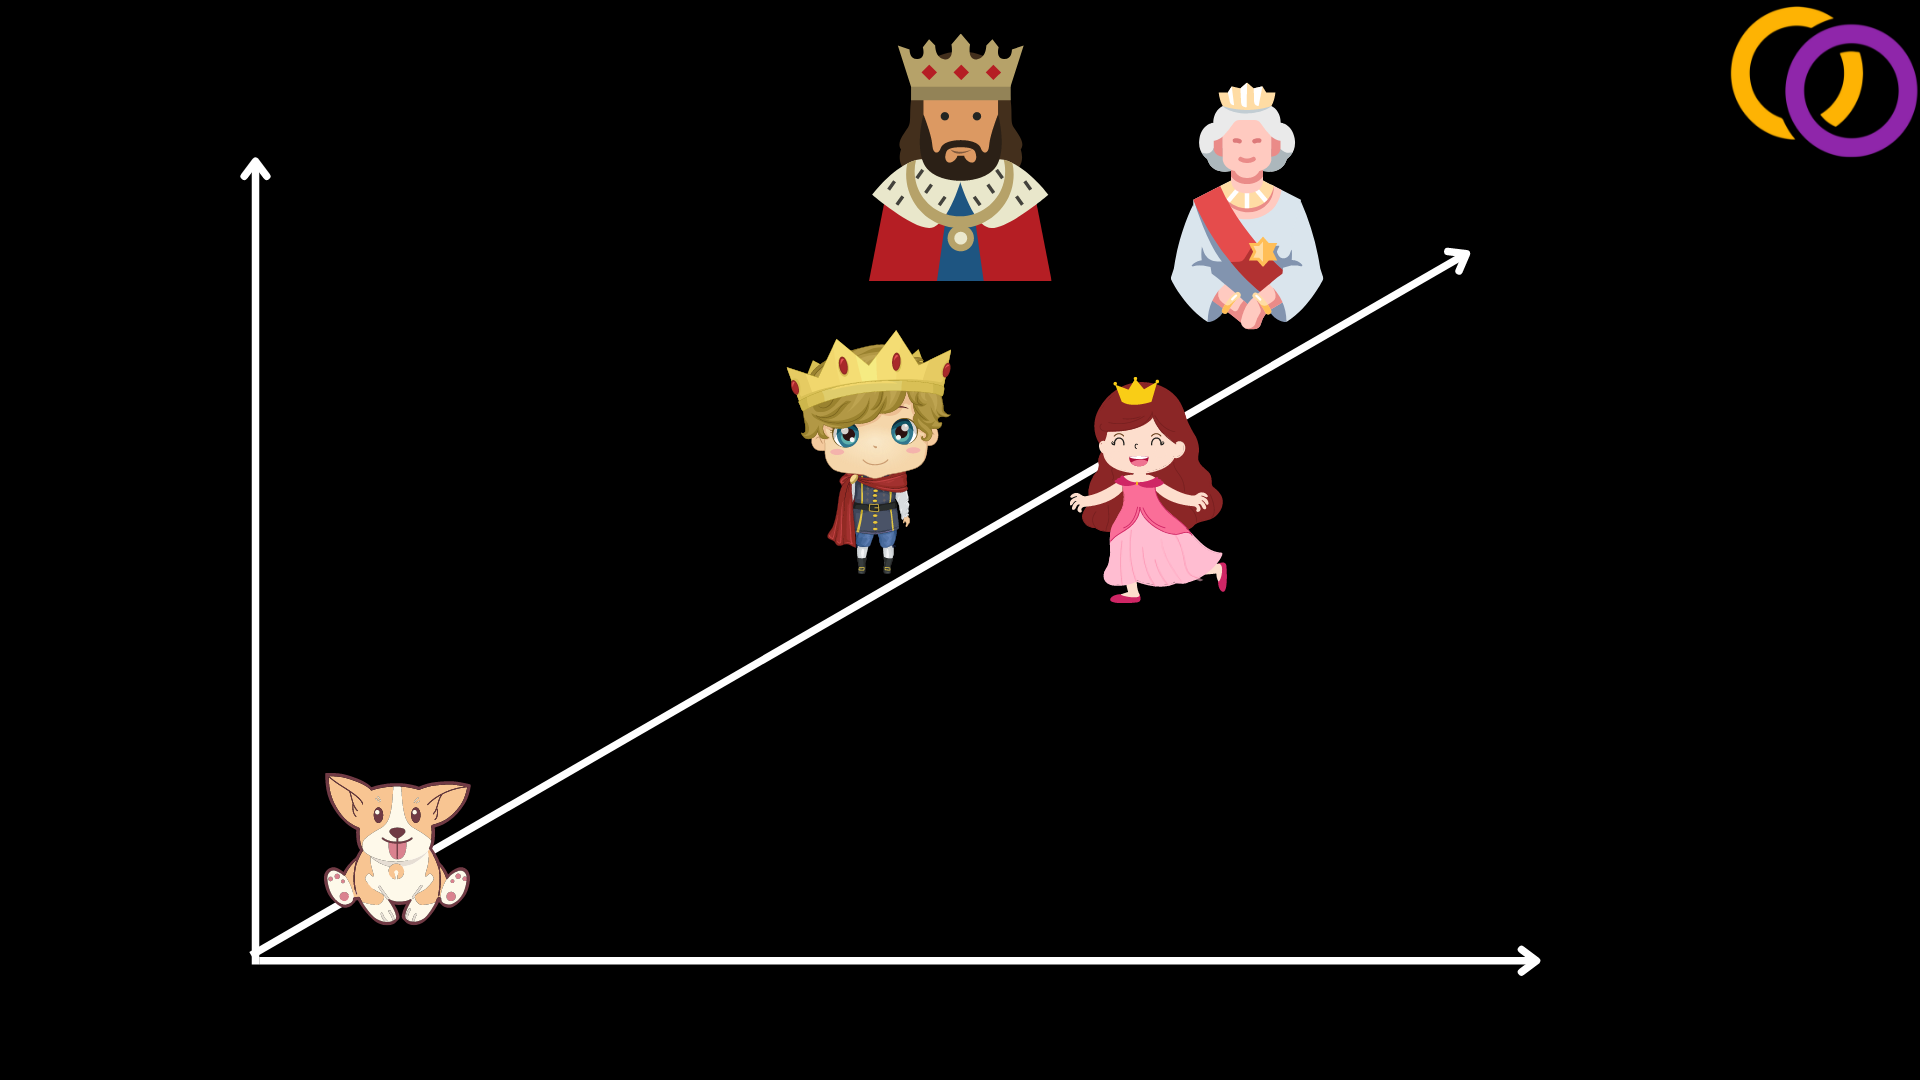 Shows a 3D graph where the royal family is clustered together and the dog is far away. 